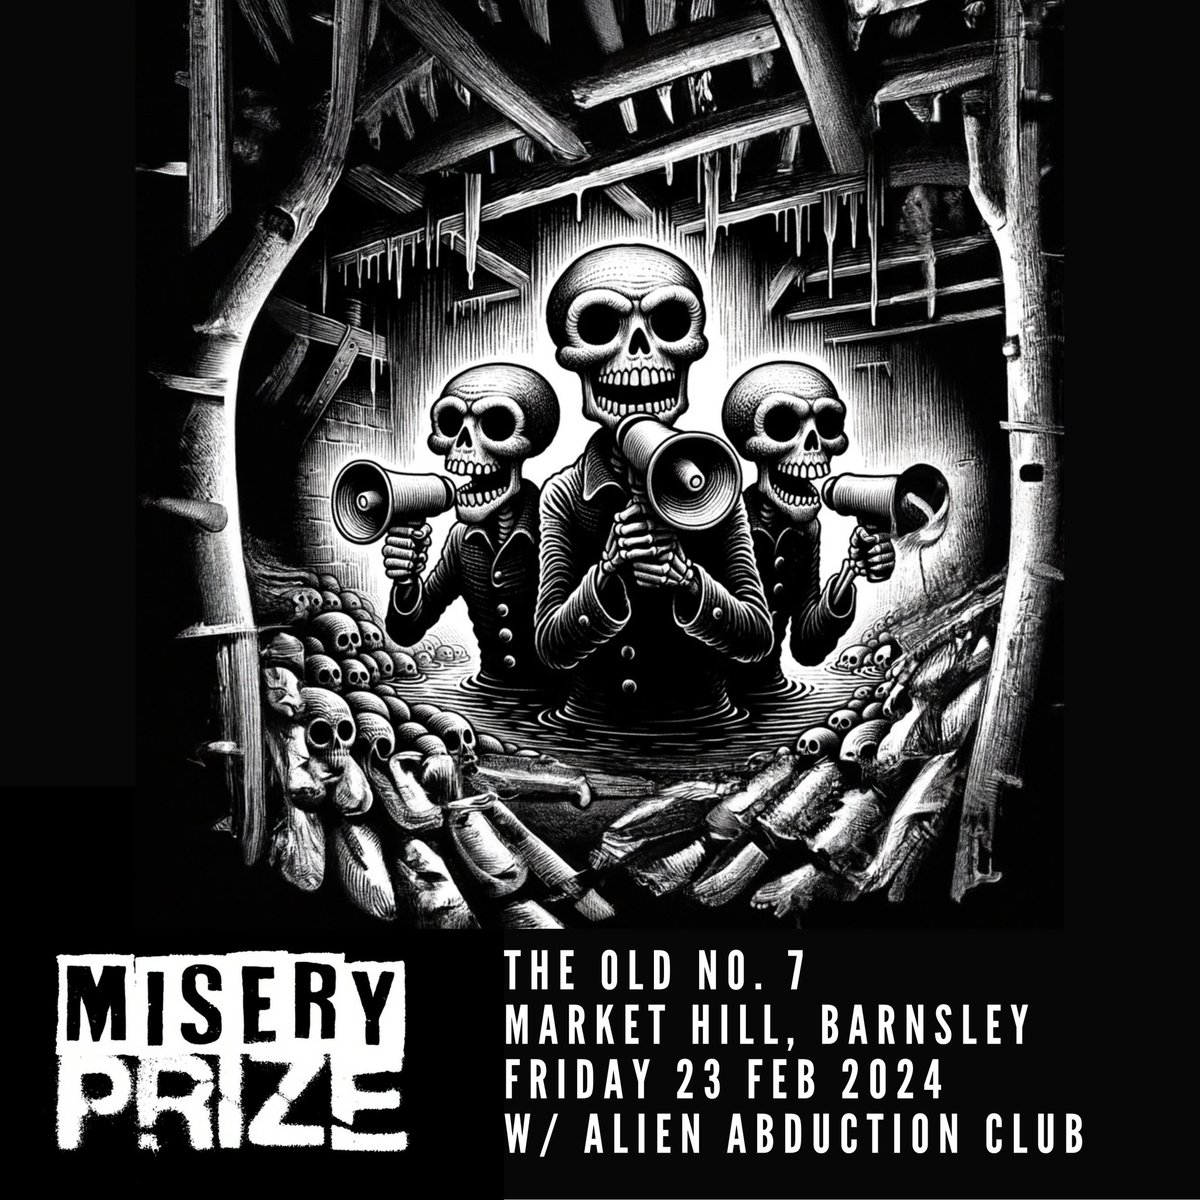 Our first gig of the year is coming very soon. Friday Feb 23rd at Old No.7 in Barnsley.

If you're in the area, we recommend us. We're gonna blow the fuckin roof off.

#yorkshiremusicscene #electropunk #giglife #livemusic #barnsley